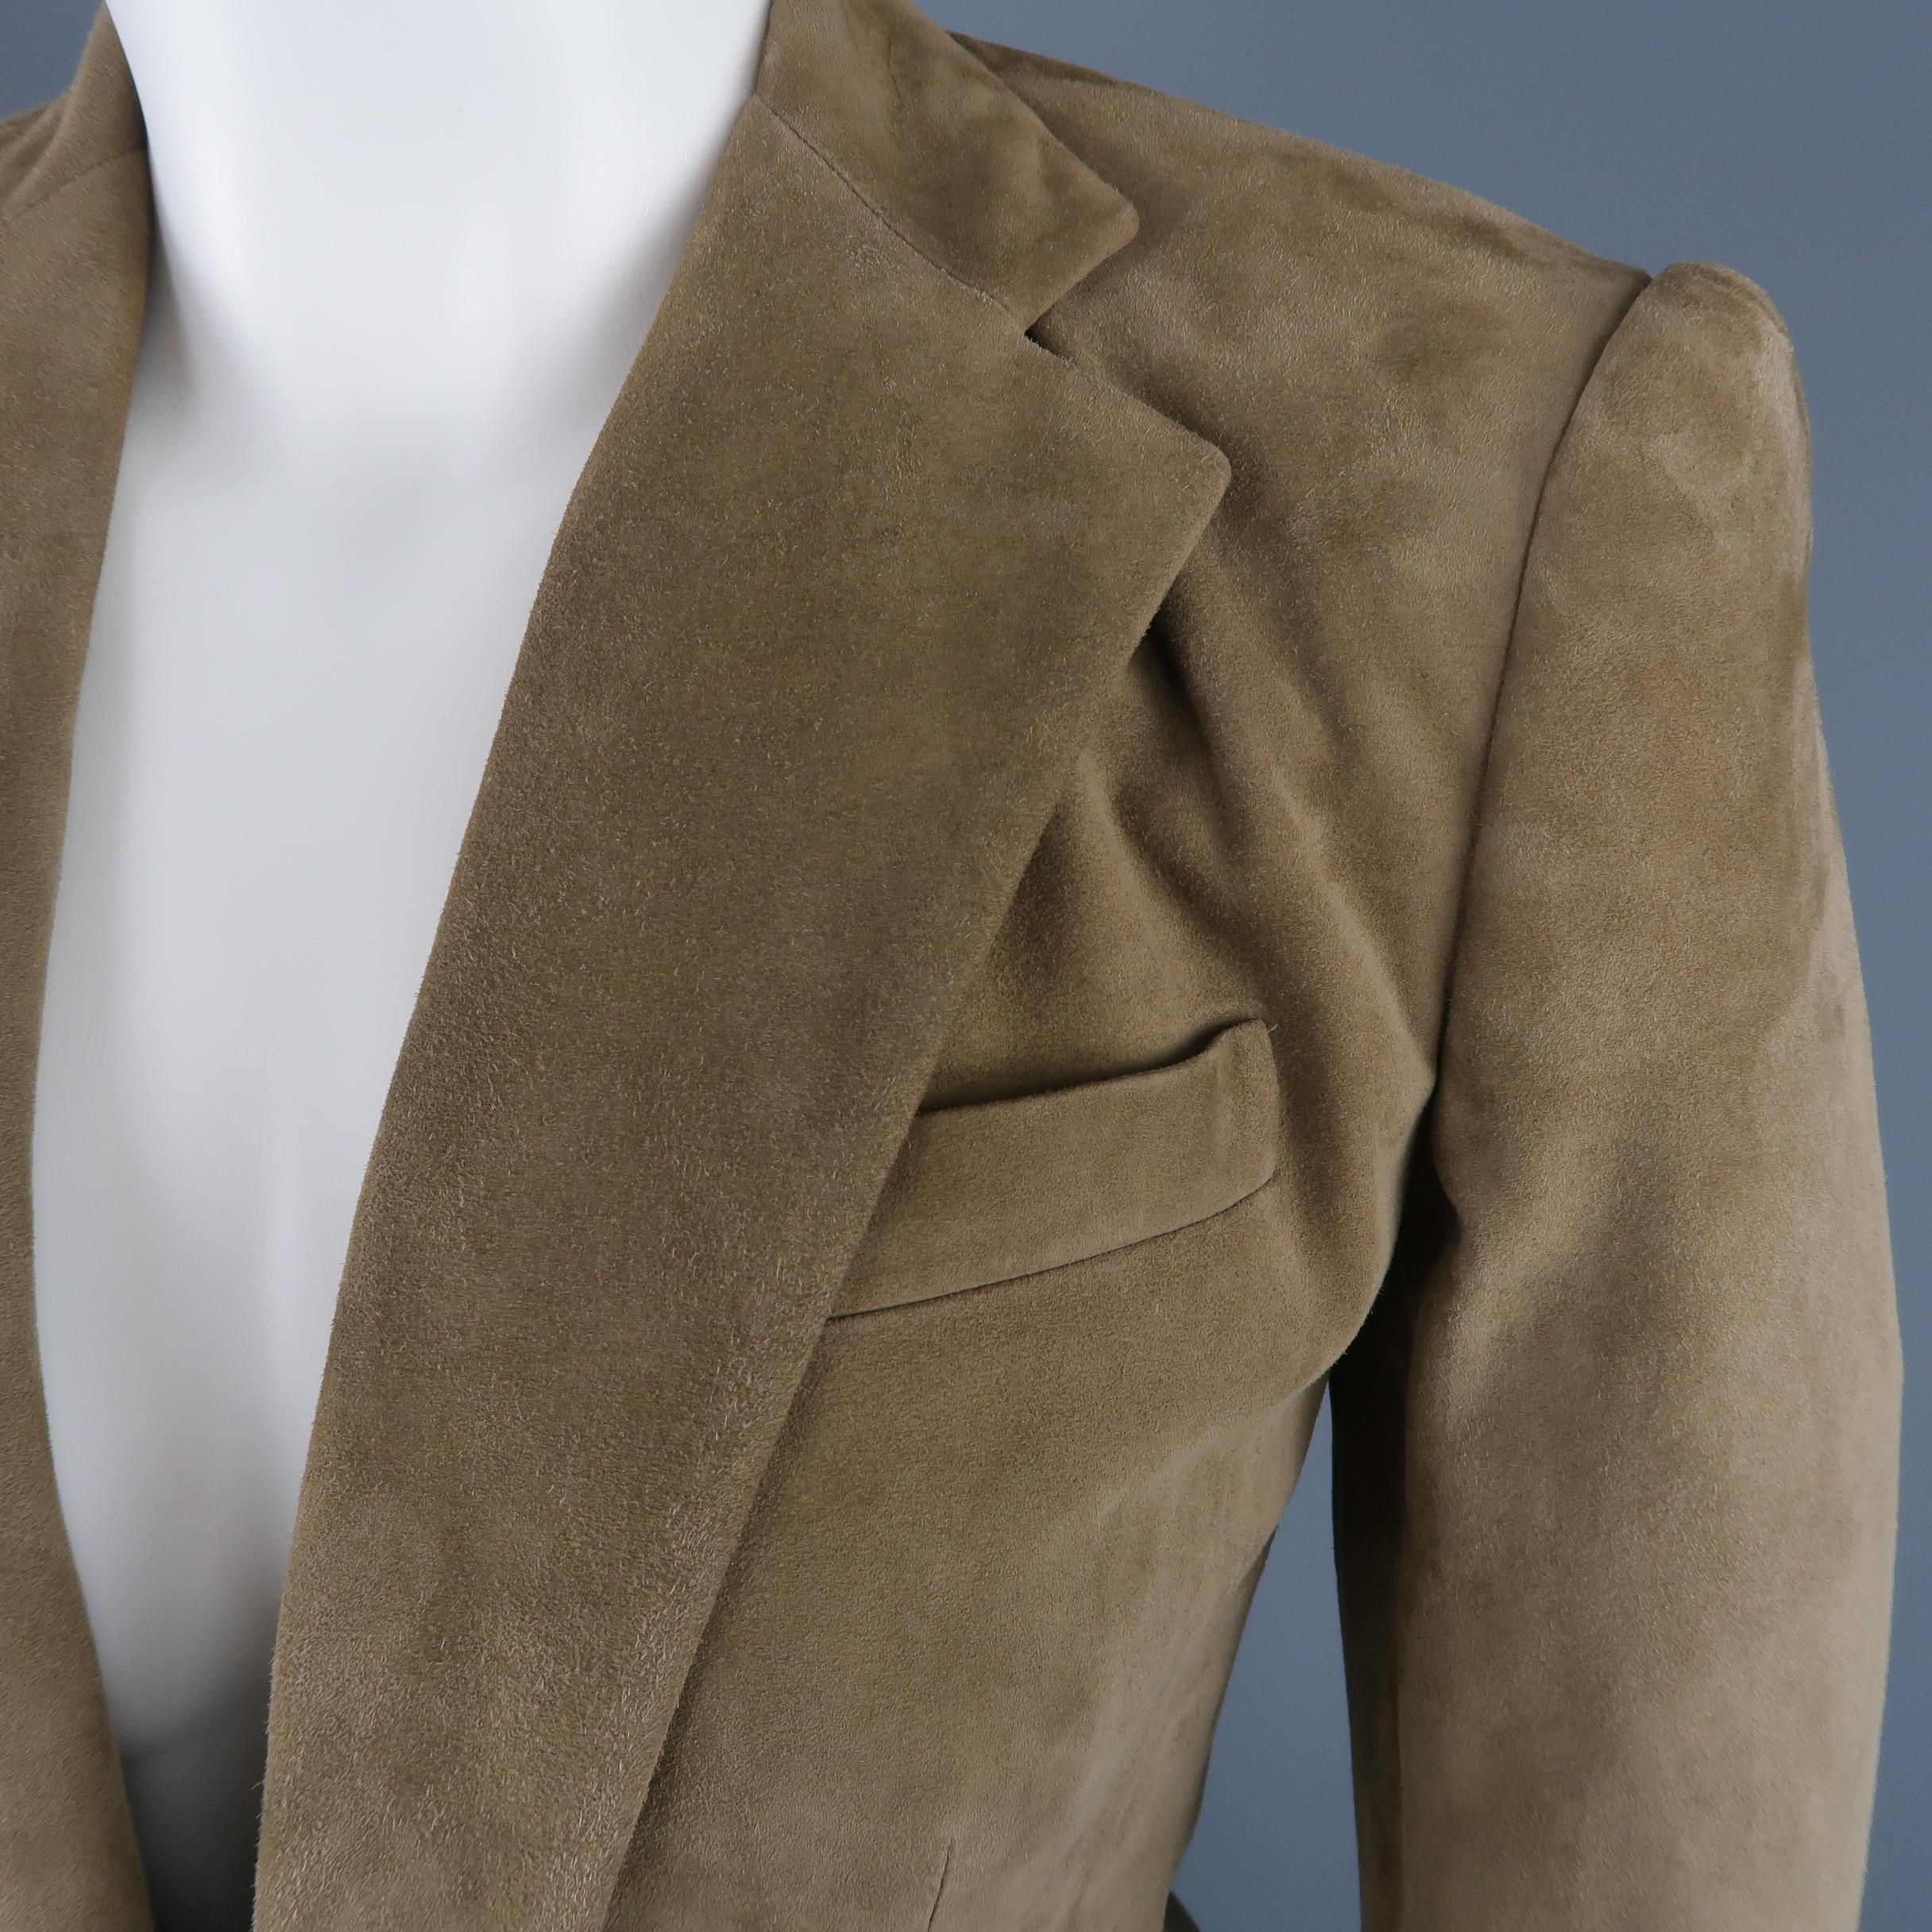 RALPH LAUREN BLACK LABEL sport coat comes in taupe suede with a notch lapel, single button front, and flap pockets. Spot on back. Made in USA.
 
Fair Pre-Owned Condition.
Marked: 4
 
Measurements:
 
Shoulder: 15 in.
Bust: 33 in.
Sleeve: 25